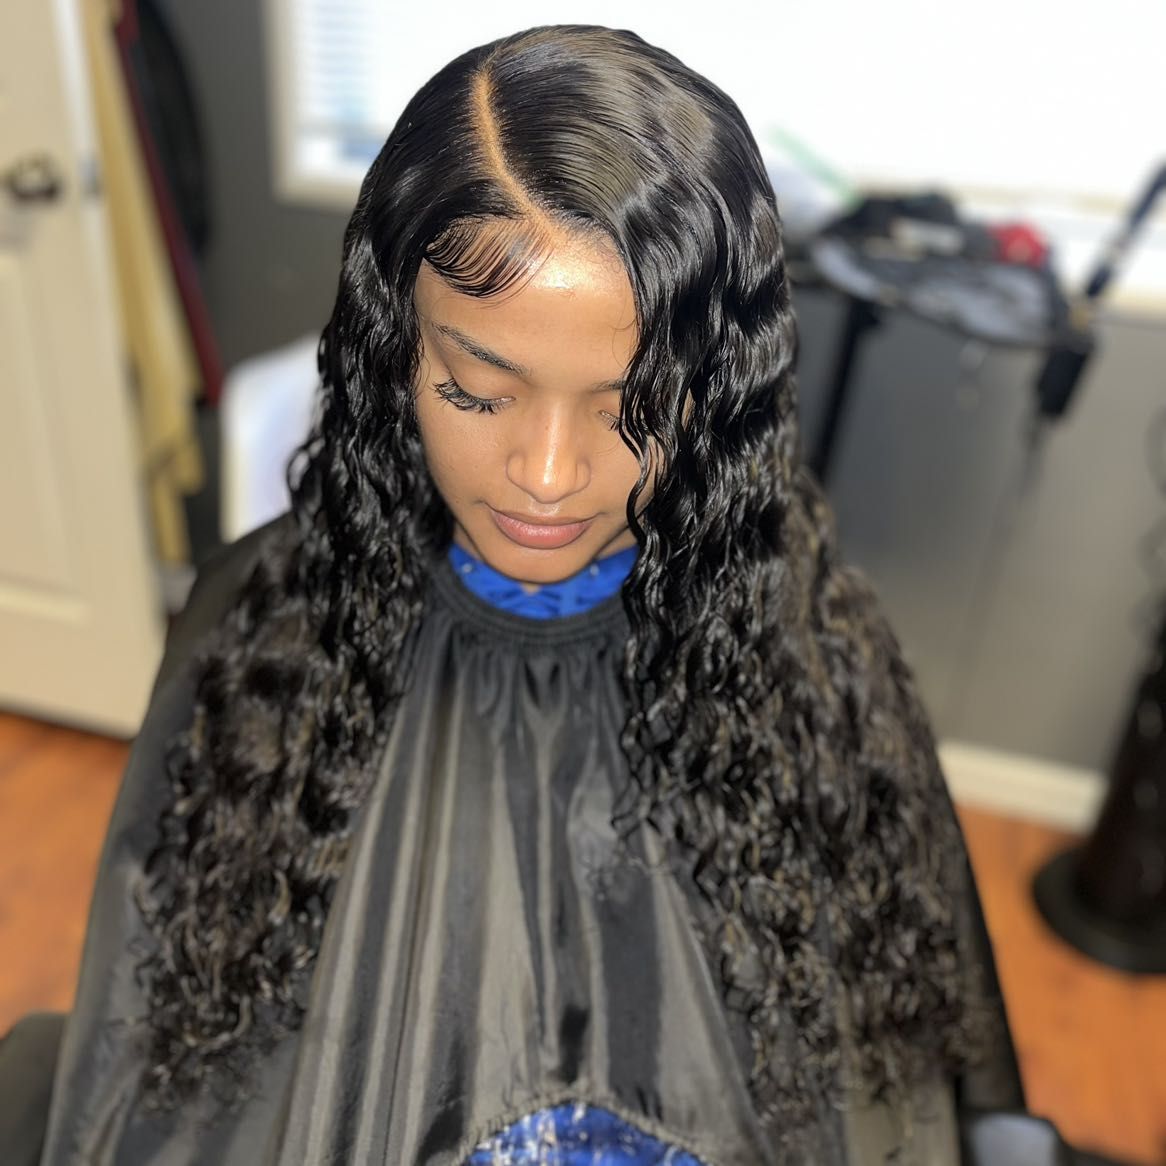 Lace Closure Install with Cut and Styling portfolio